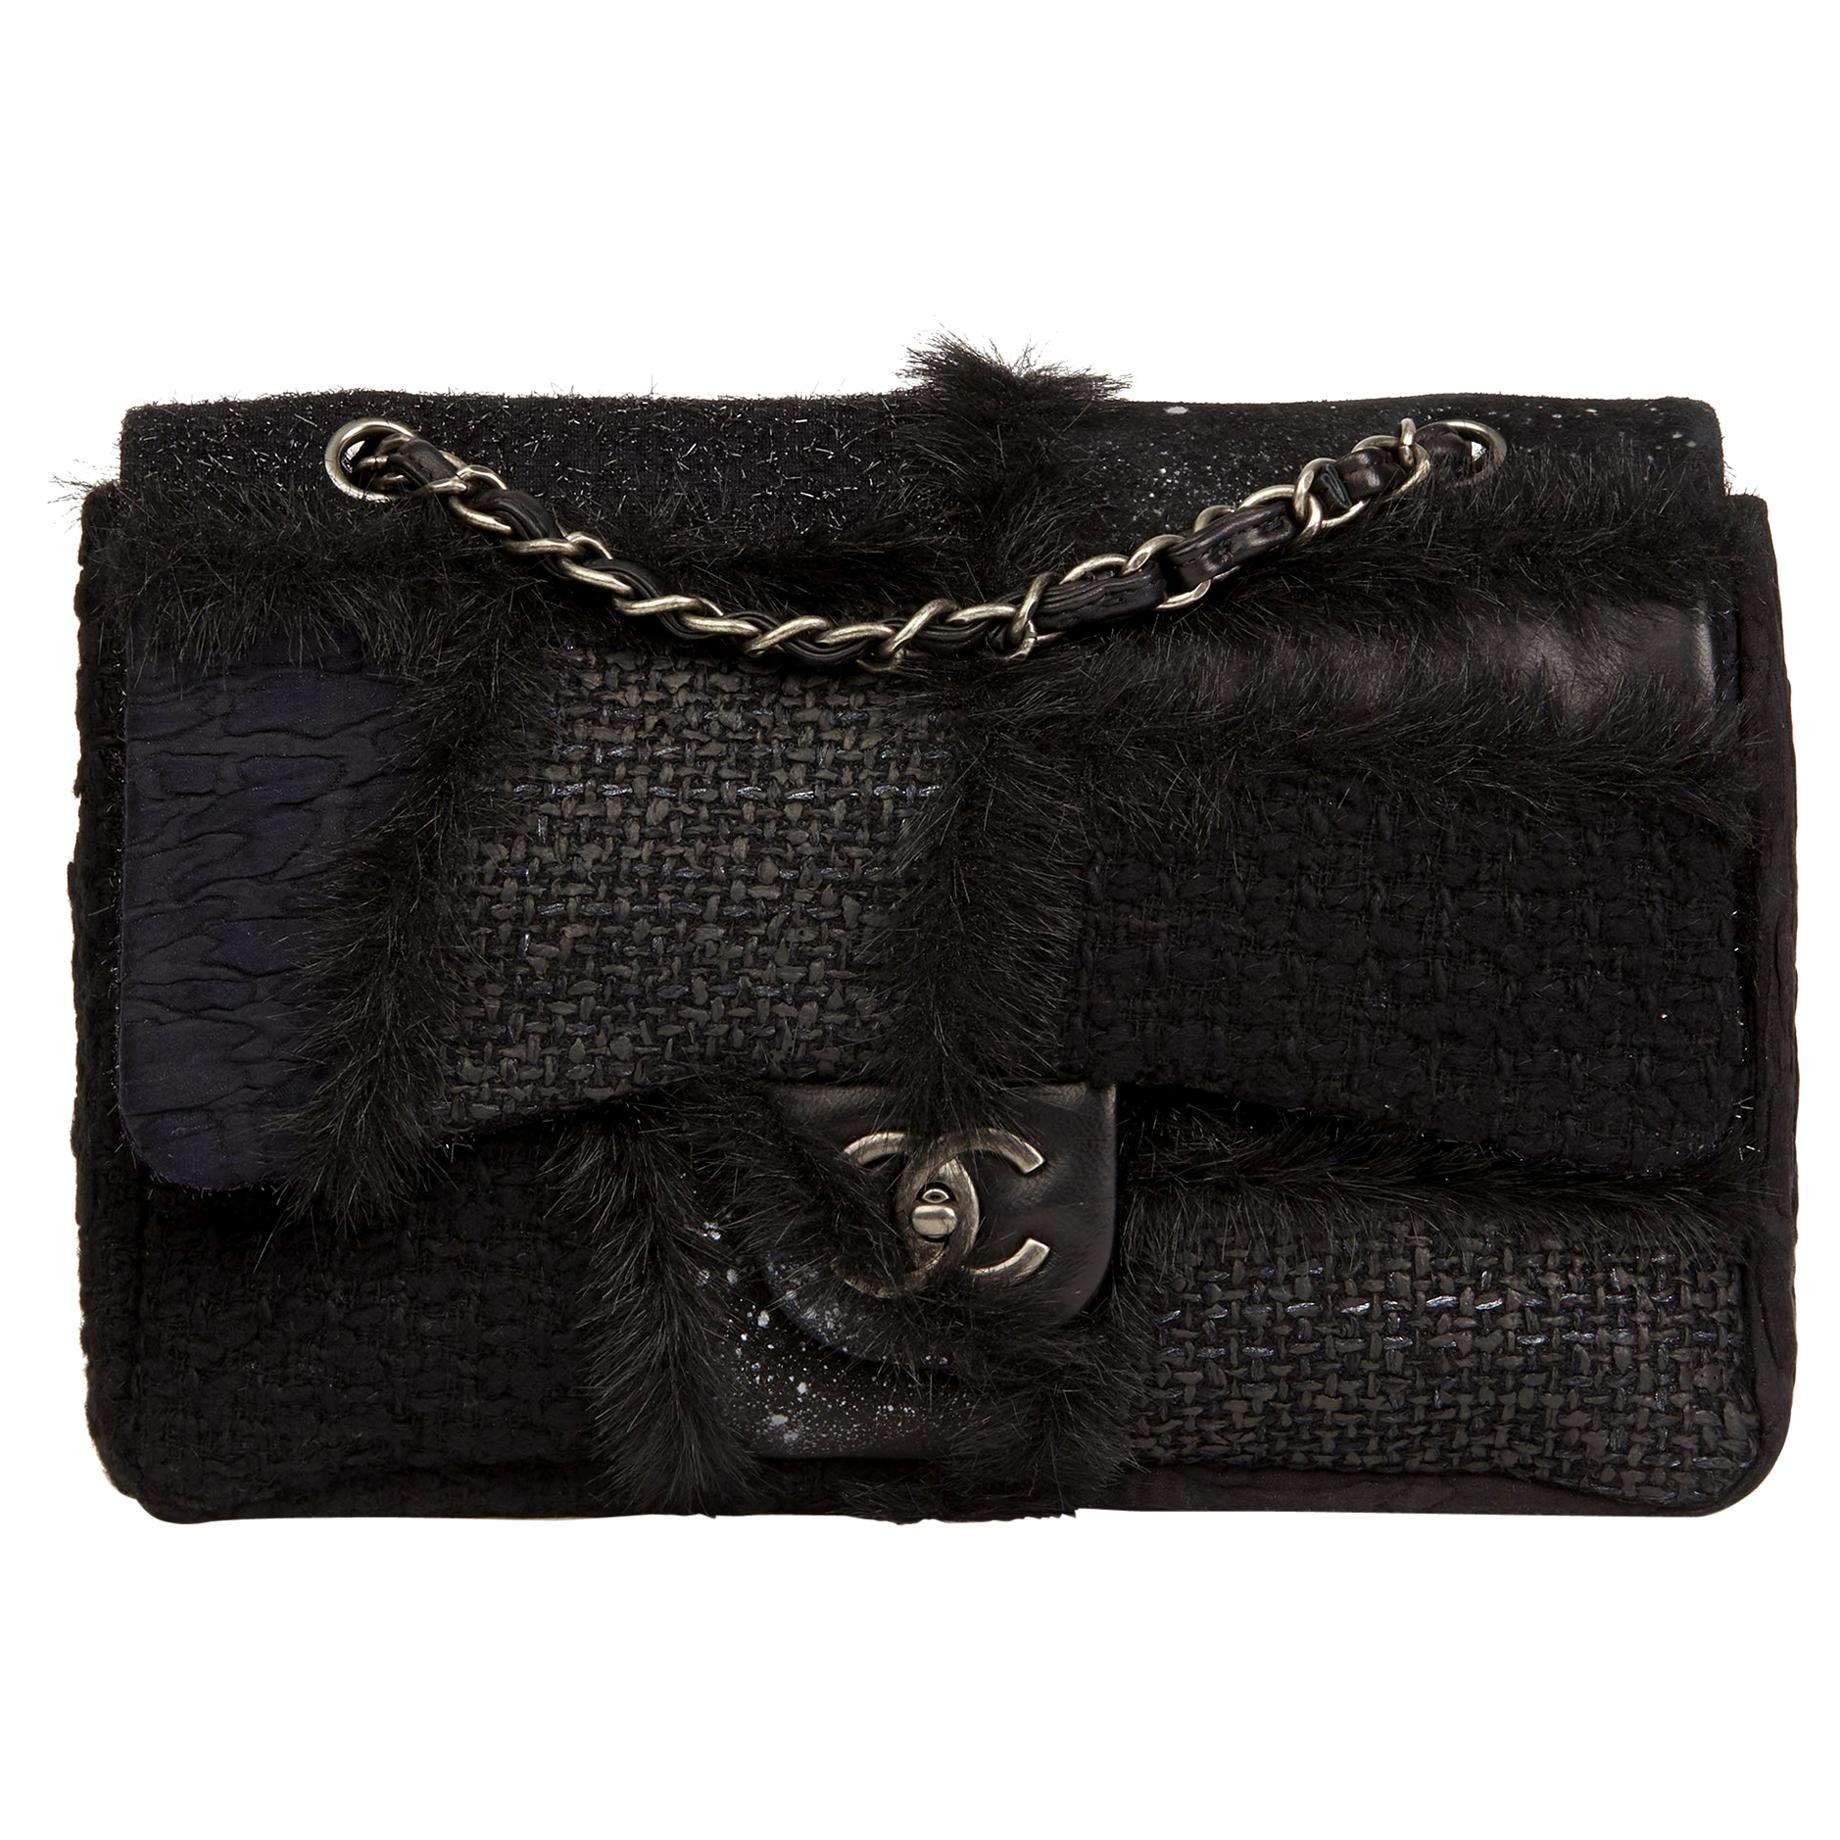 2011 Chanel Tweed Fabric, Leather and Fantasy Fur Patchwork Jumbo